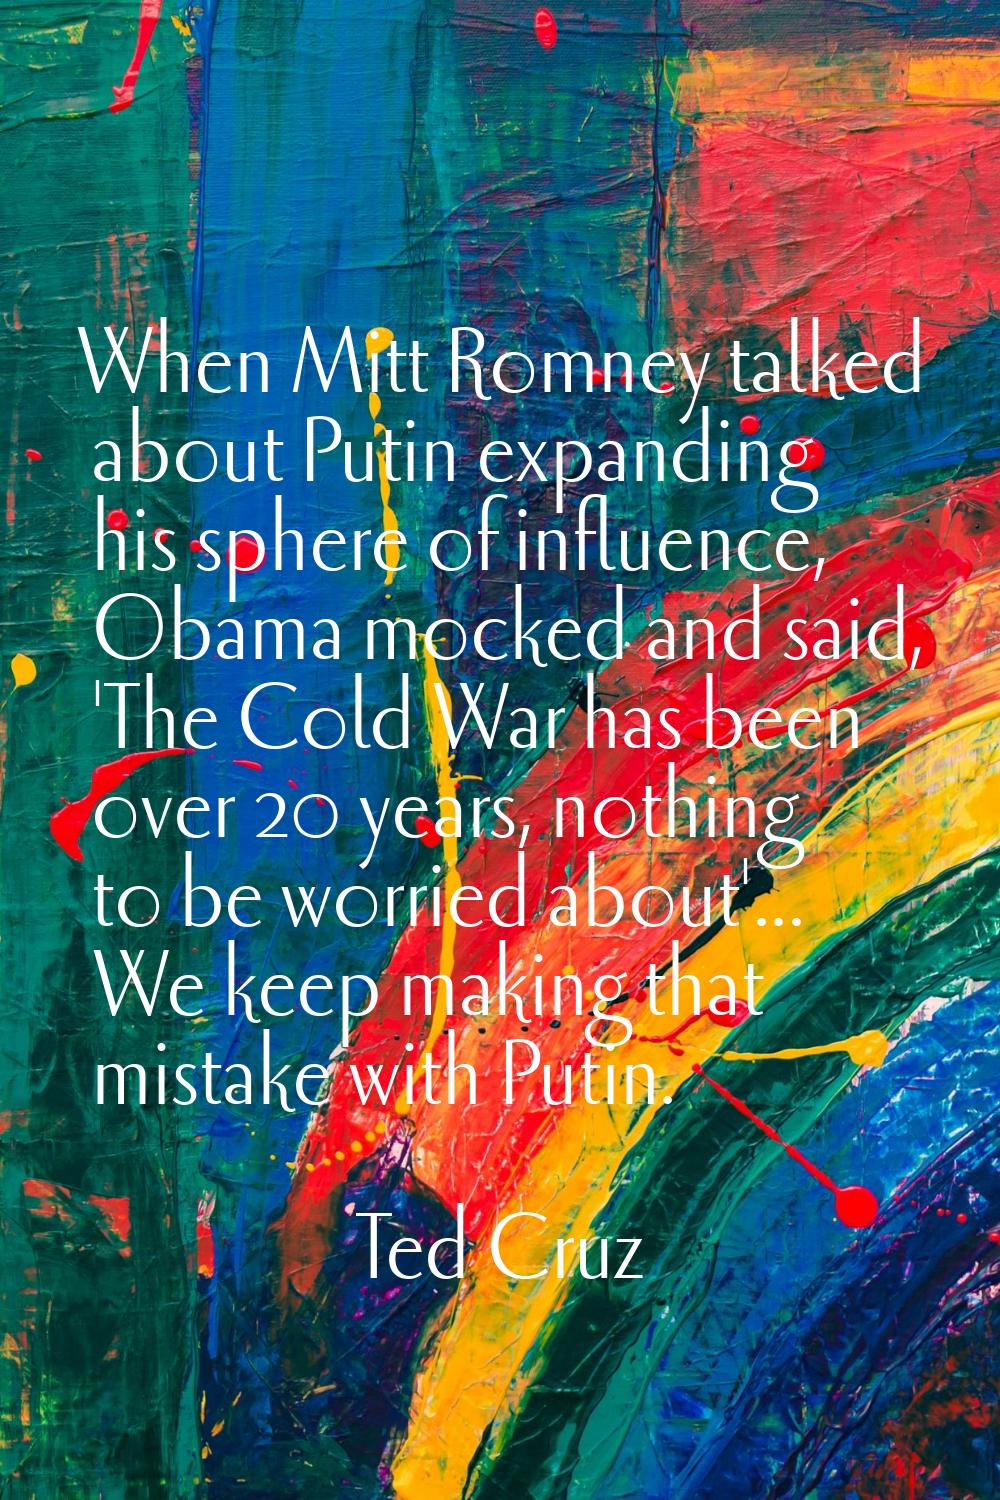 When Mitt Romney talked about Putin expanding his sphere of influence, Obama mocked and said, 'The 